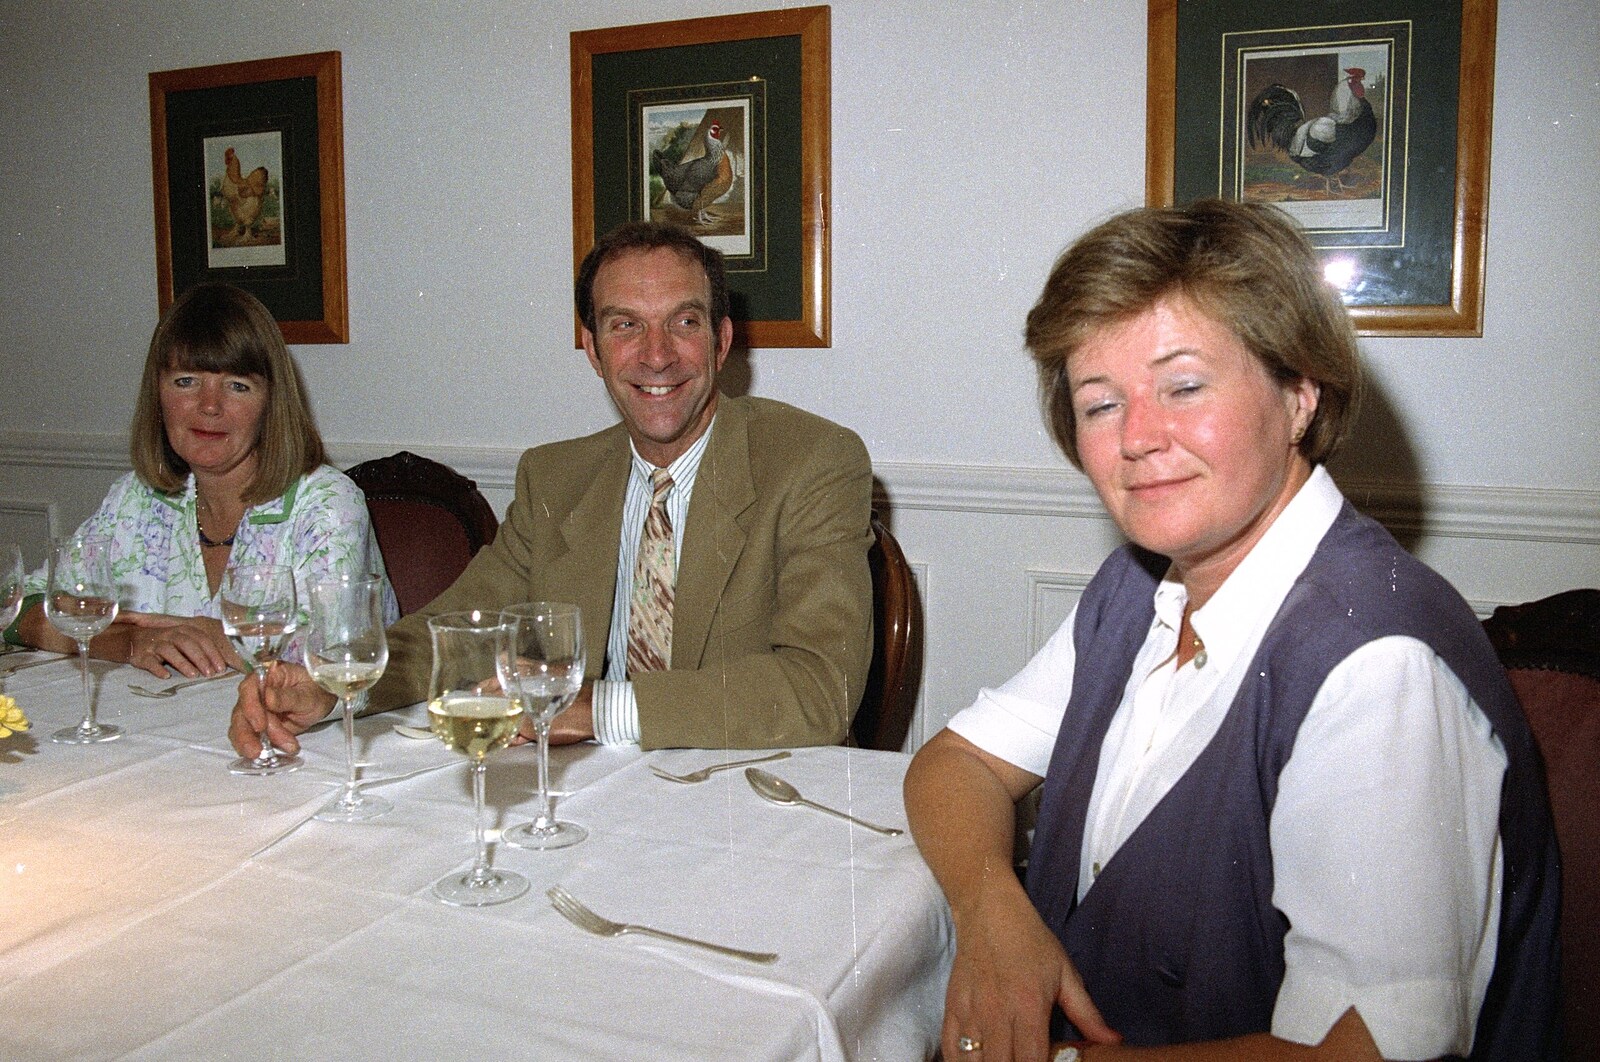 Grandmother's Seventieth Birthday, Brockenhurst and Keyhaven, Hampshire - 11th September 1994: Mother, Mike and Judith